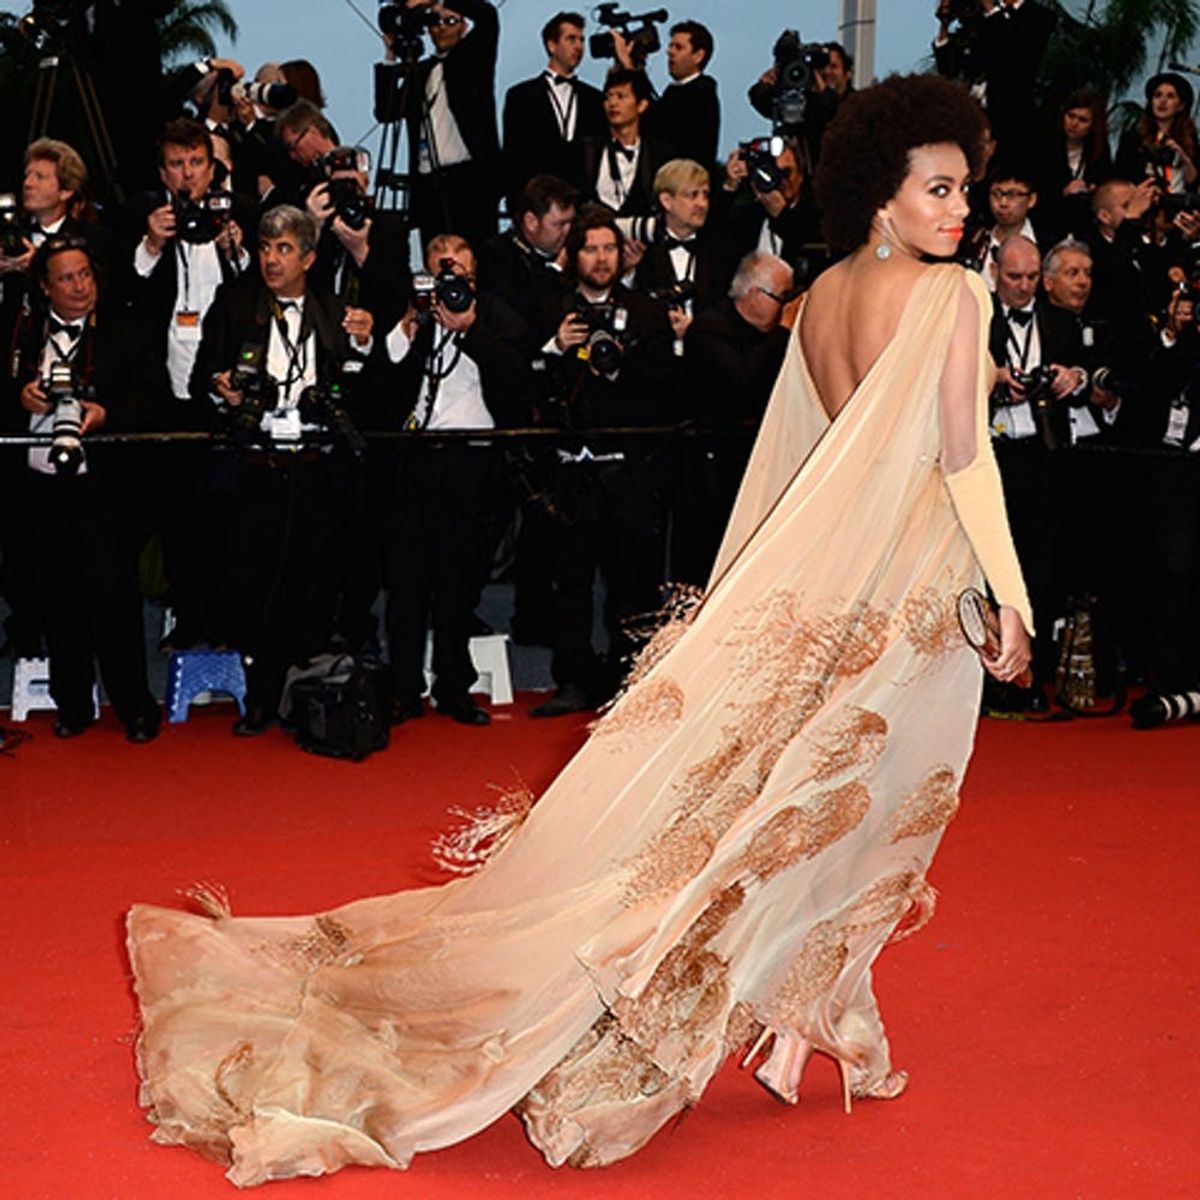 16 of the Best-Dressed Celebs at Cannes We’re STILL Swooning Over